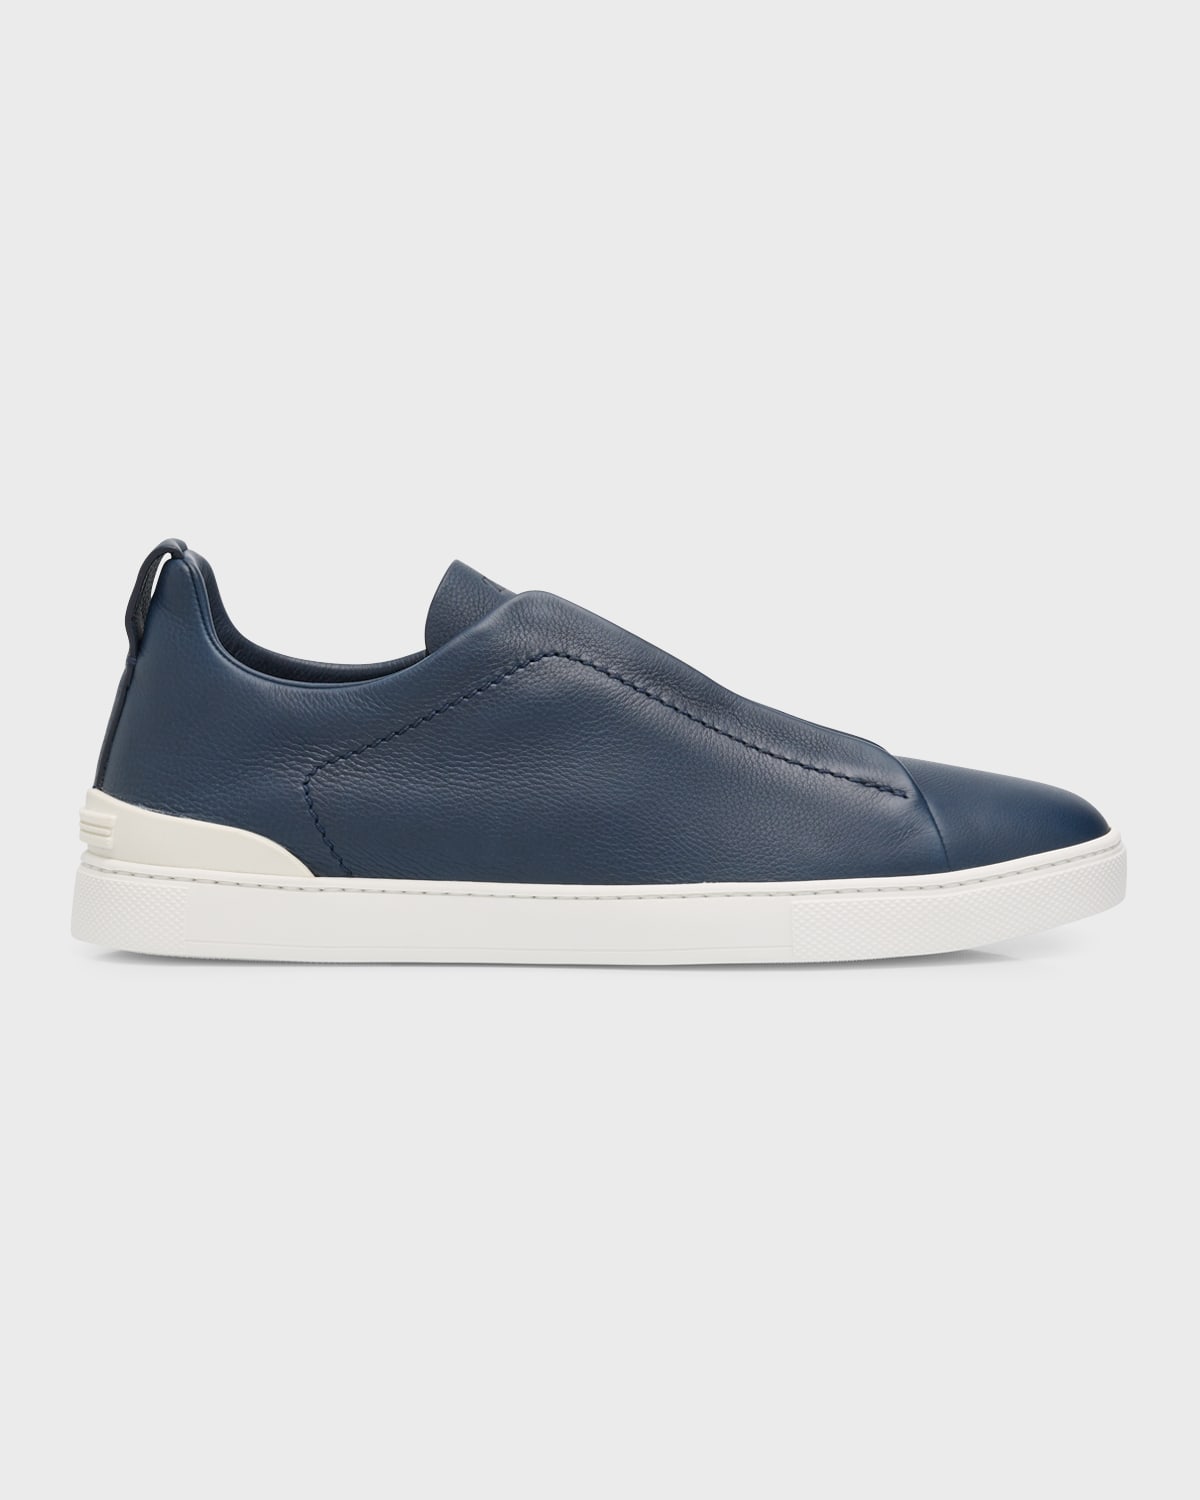 Men's Triple Stitch™ Slip-On Soft Calf Leather Low-Top Sneakers